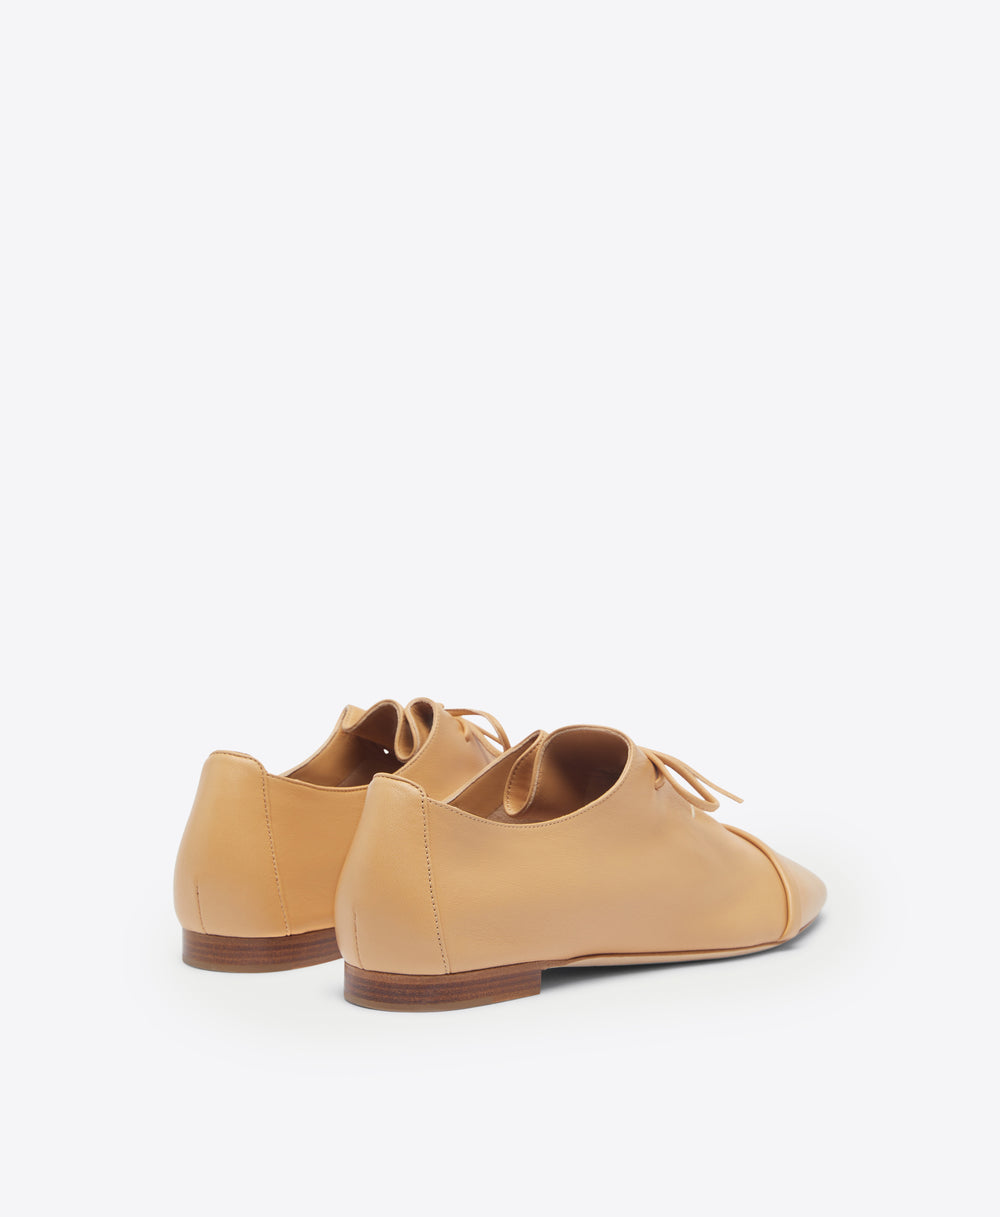 Malone Souliers Jean Sepia Leather Flat Loafers